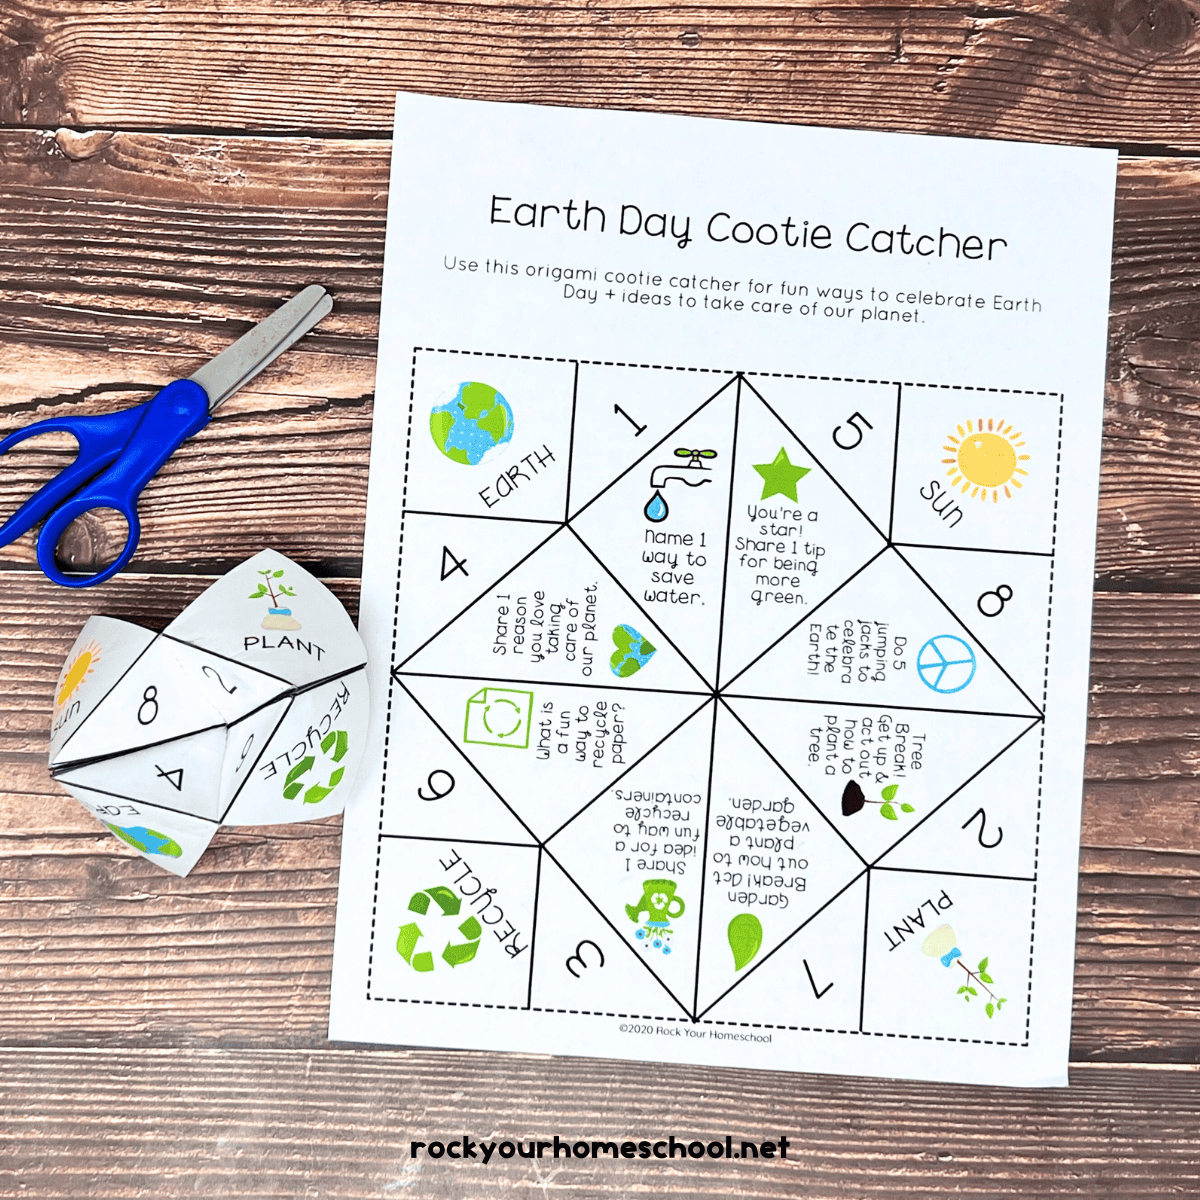 Free printable page of Earth Day cootie catcher and folded version with blue scissors.